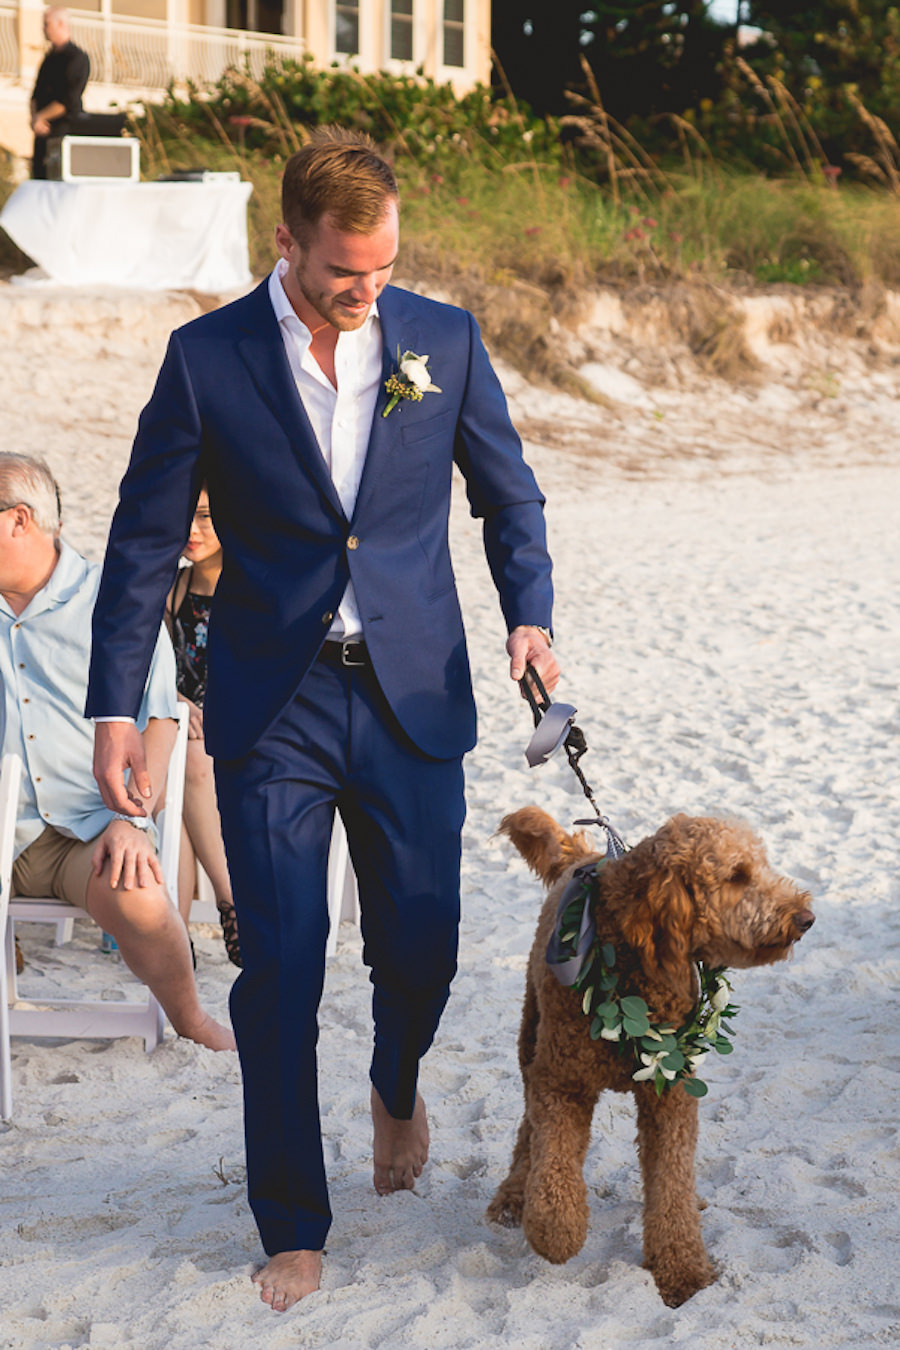 Groom in Navy Suite with Goldendoodle Dog at Beachfront Wedding Ceremony